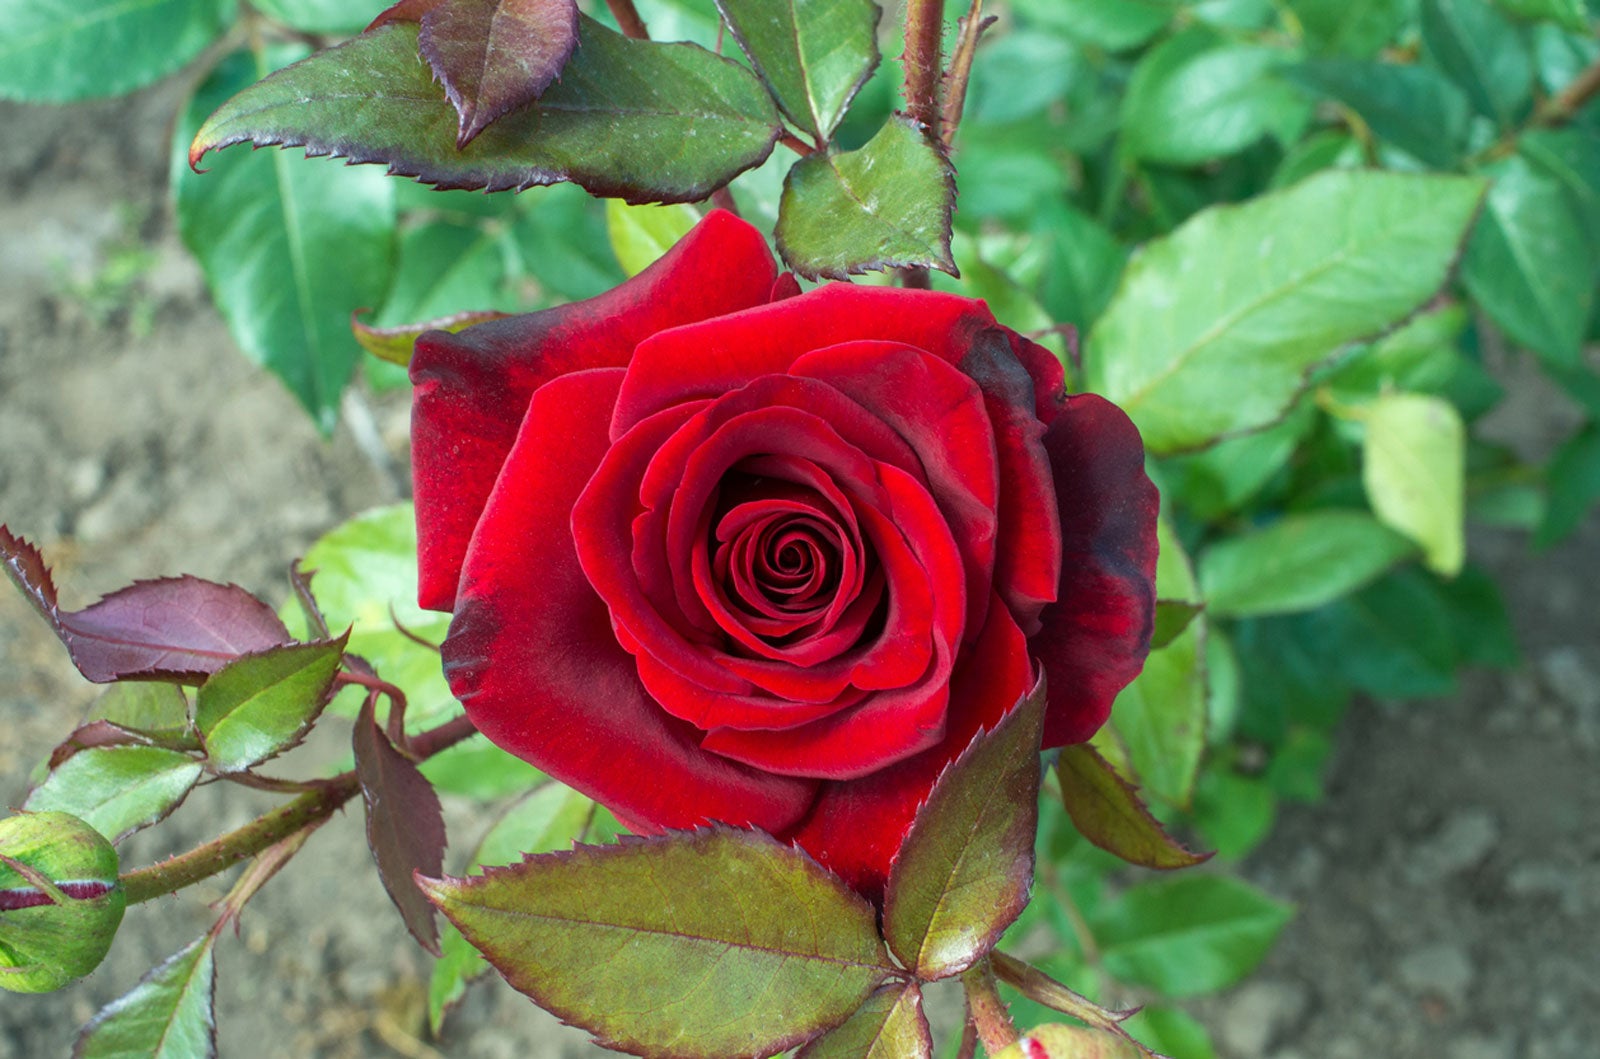 A red rose on a plant